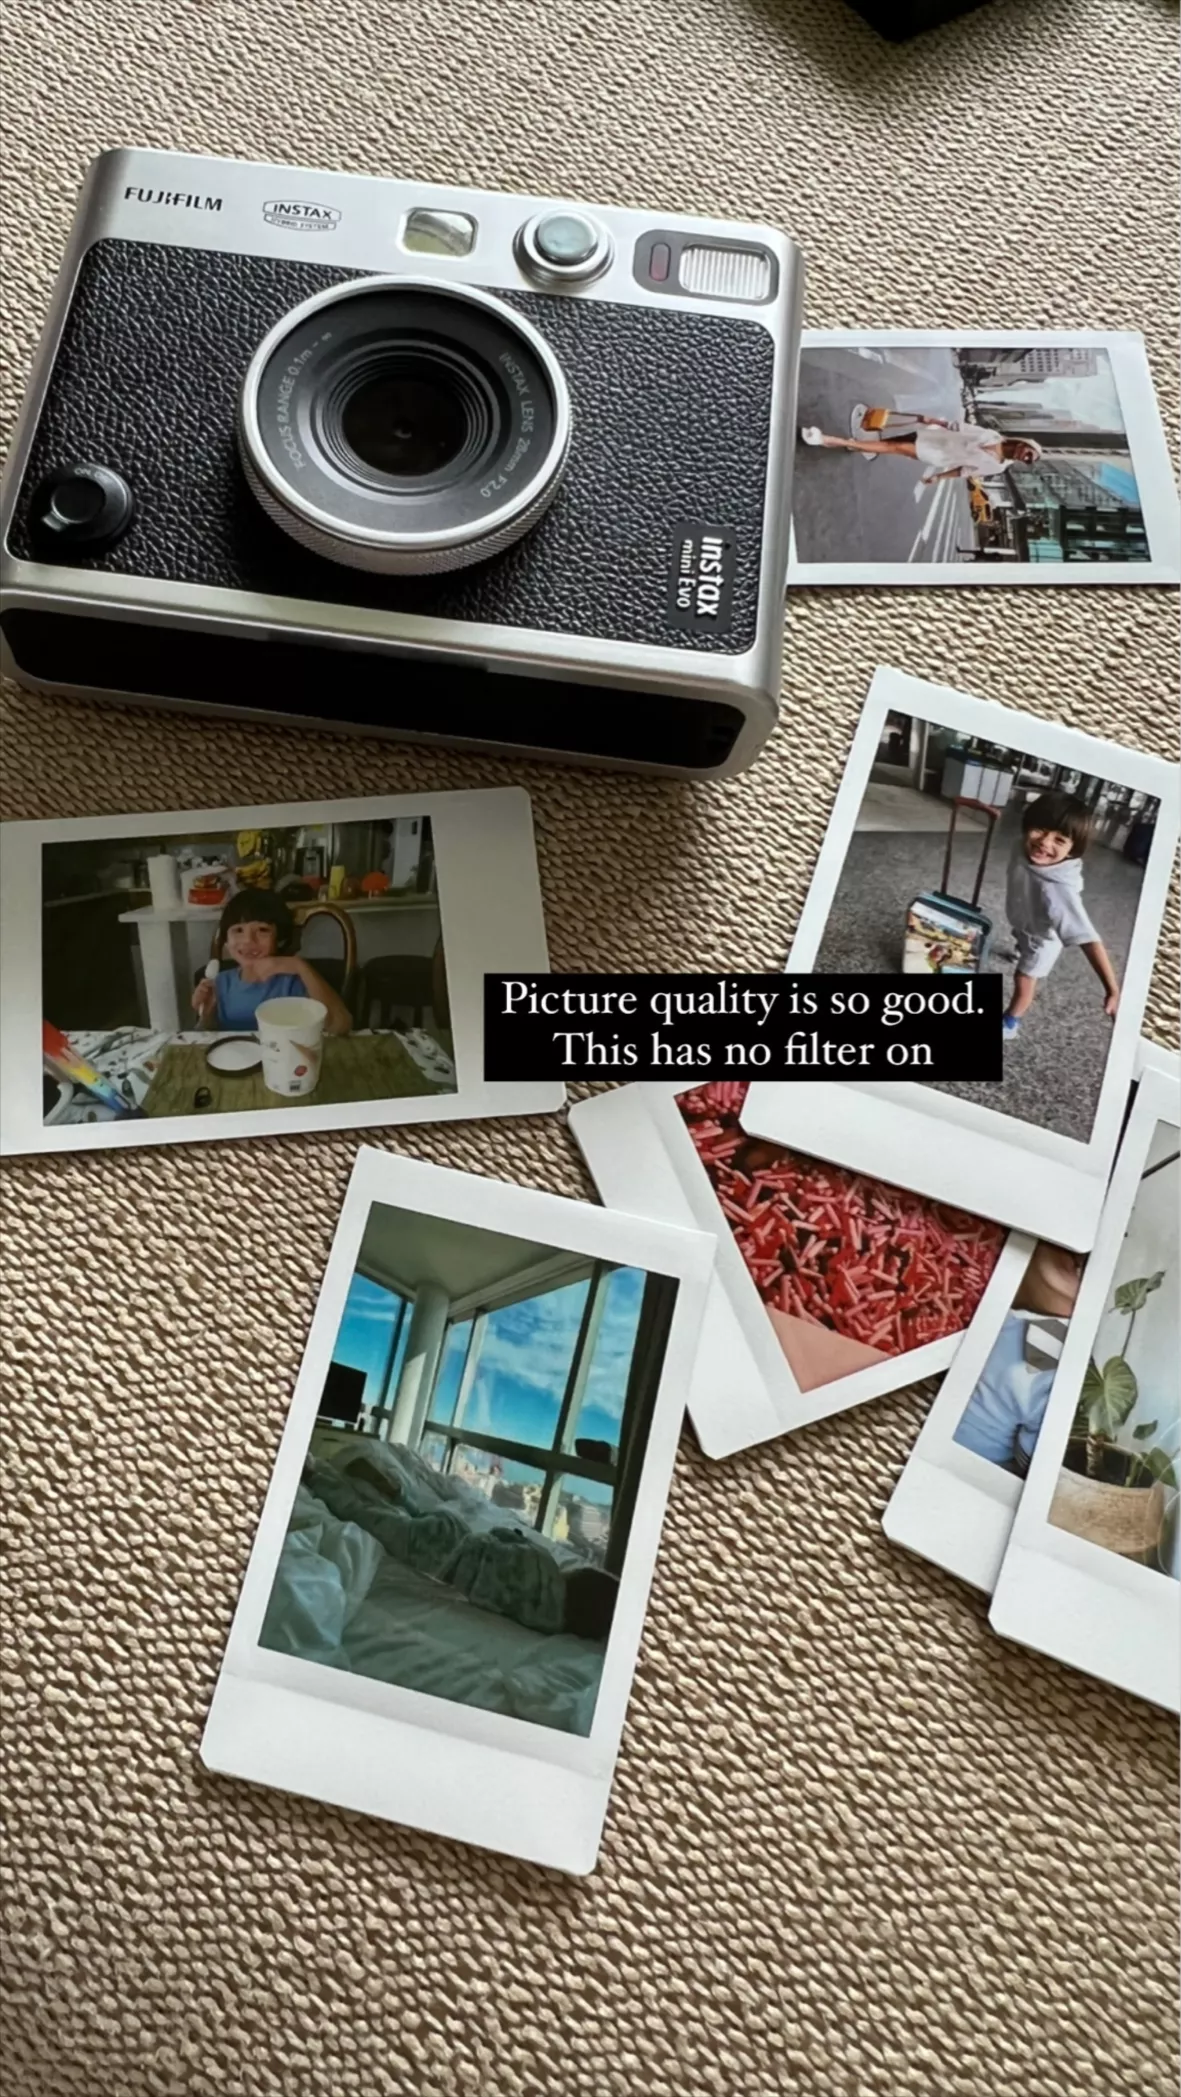 Fujifilm's Instax Mini Evo camera lets you send snaps directly to your phone